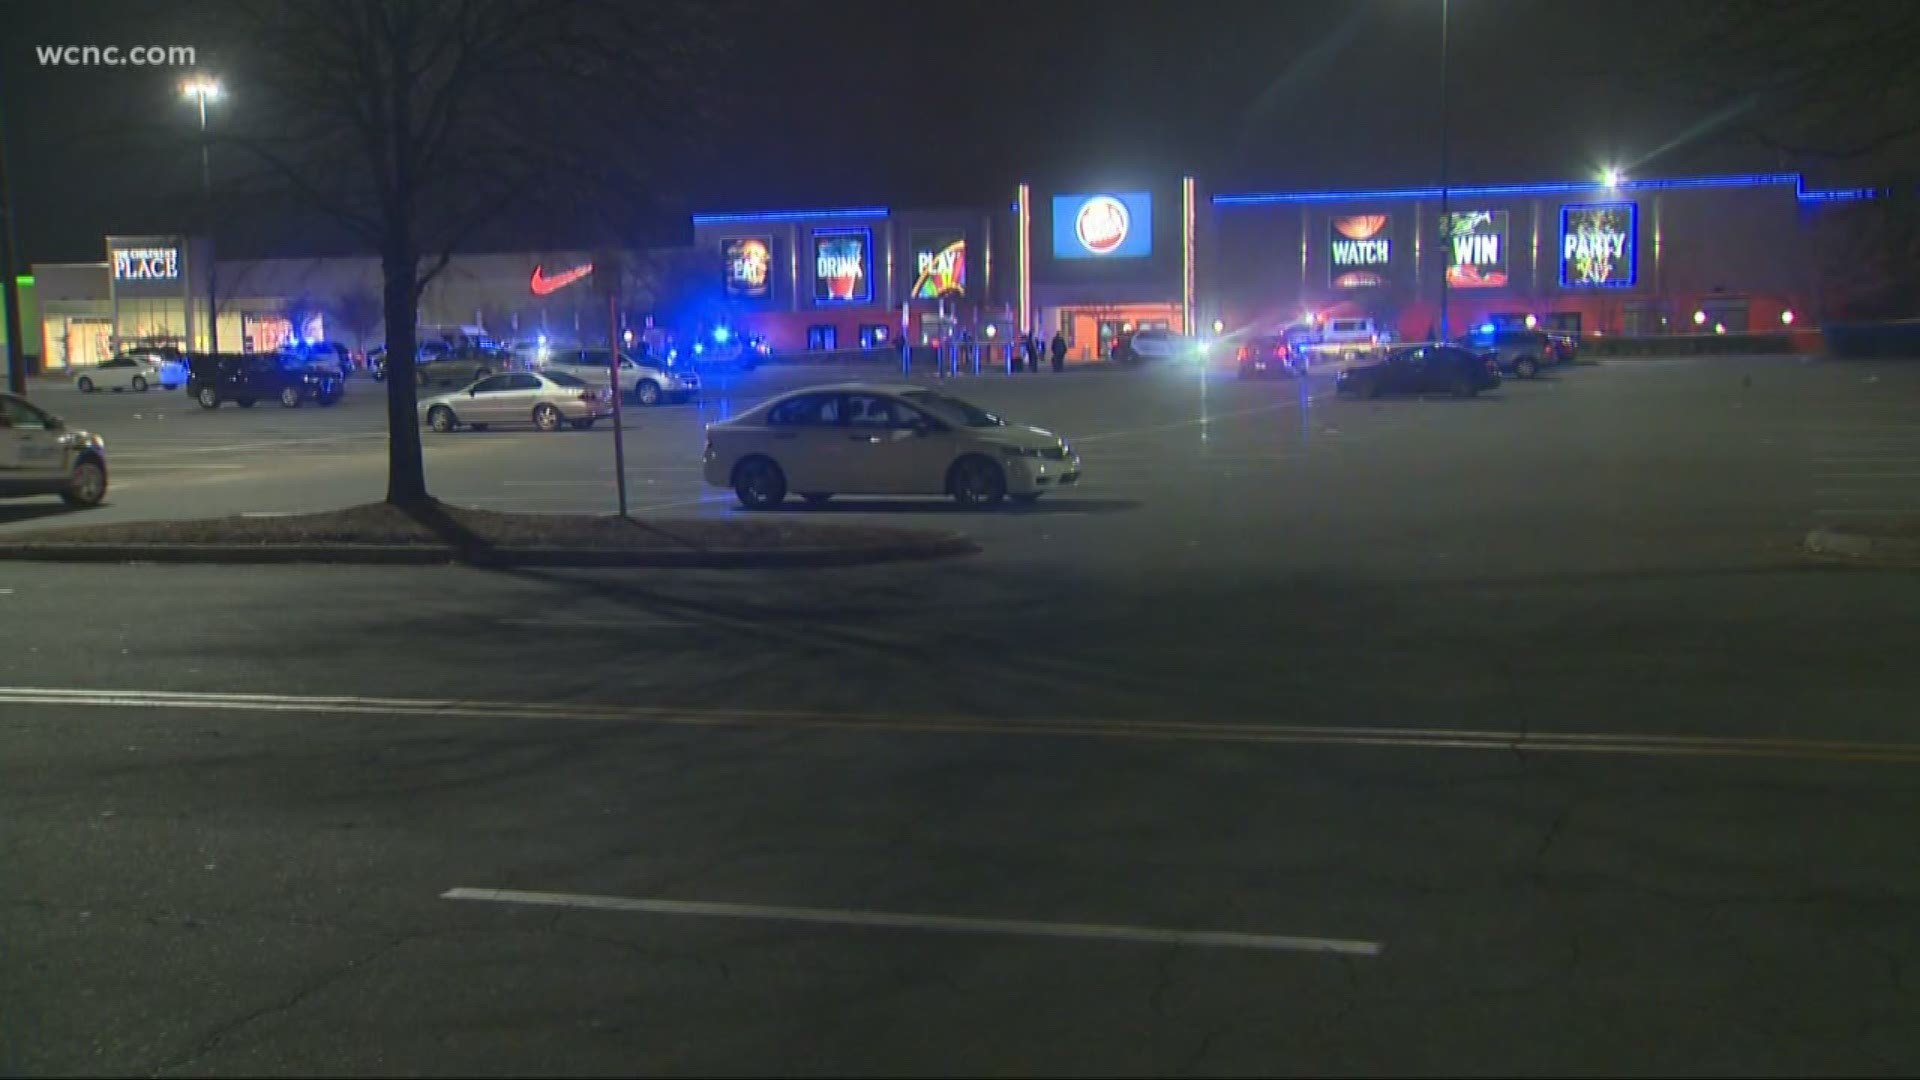 The deadly shooting of a 13-year-old girl in the Dave & Buster's parking lot is now raising concerns about safety at the mall.